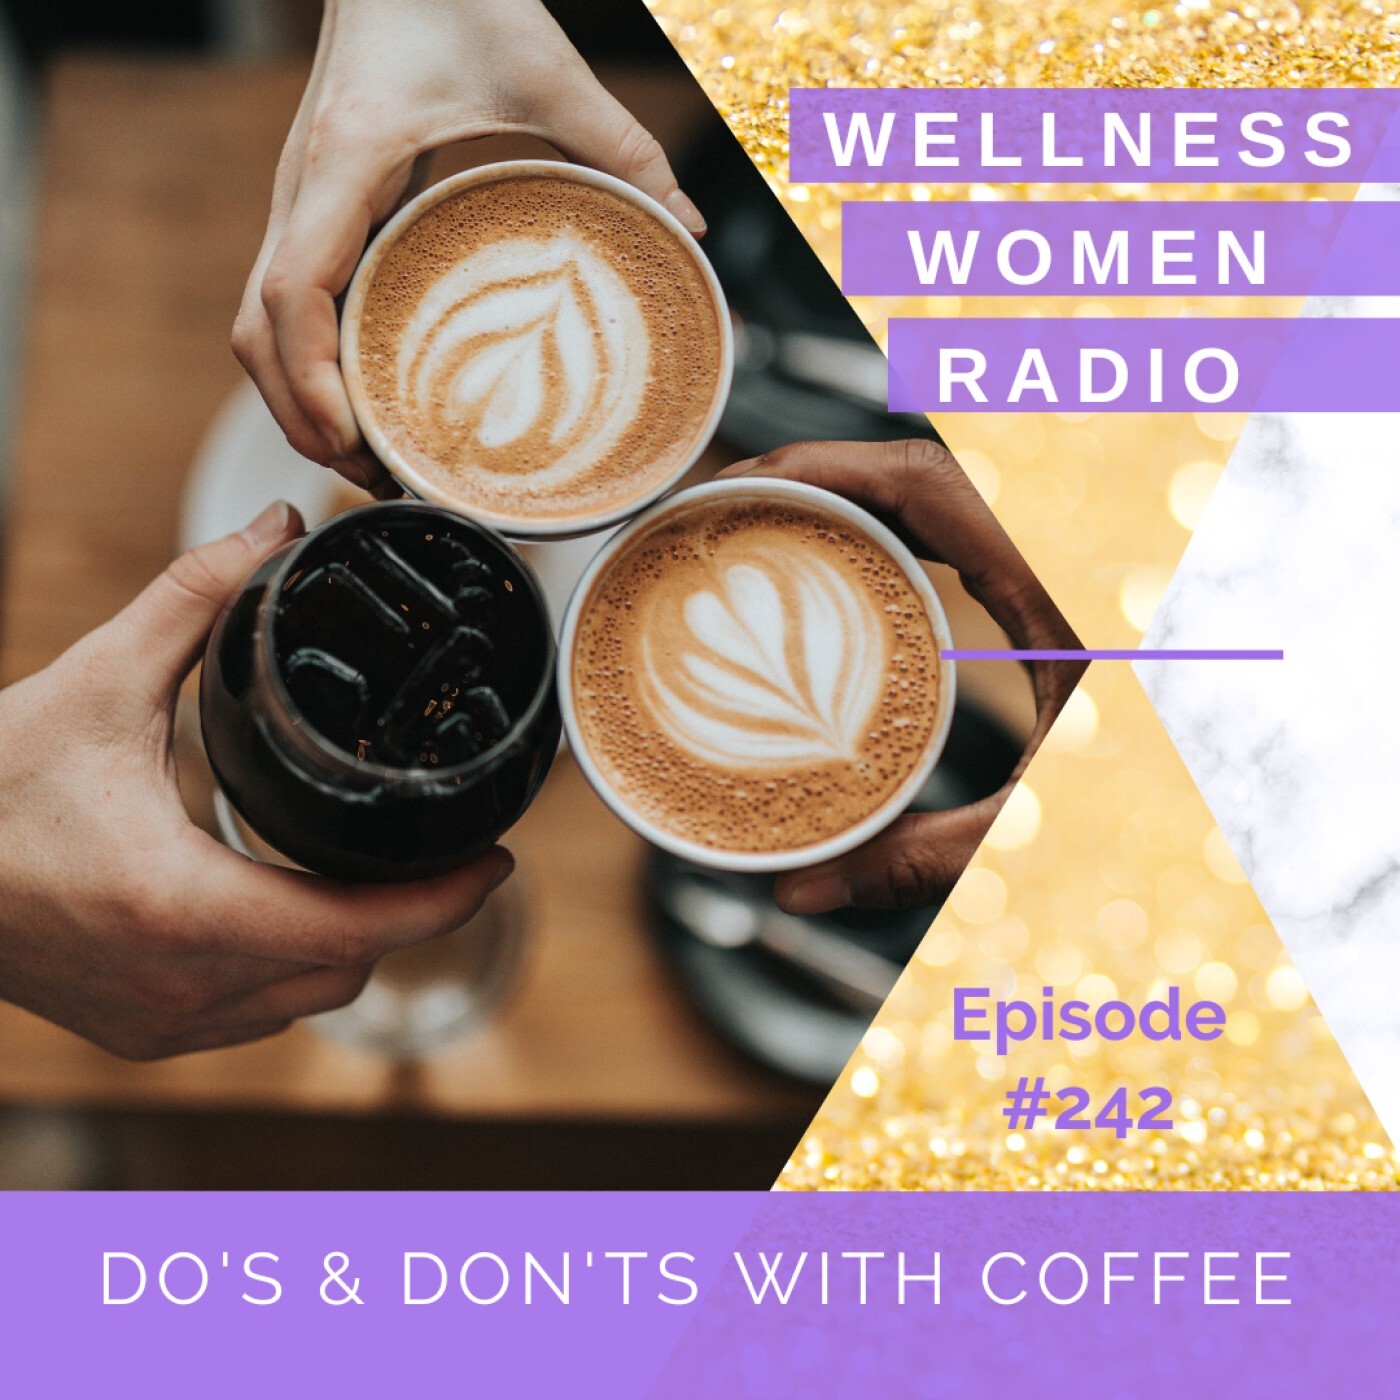 WWR 242: Do’s and don’ts with Coffee